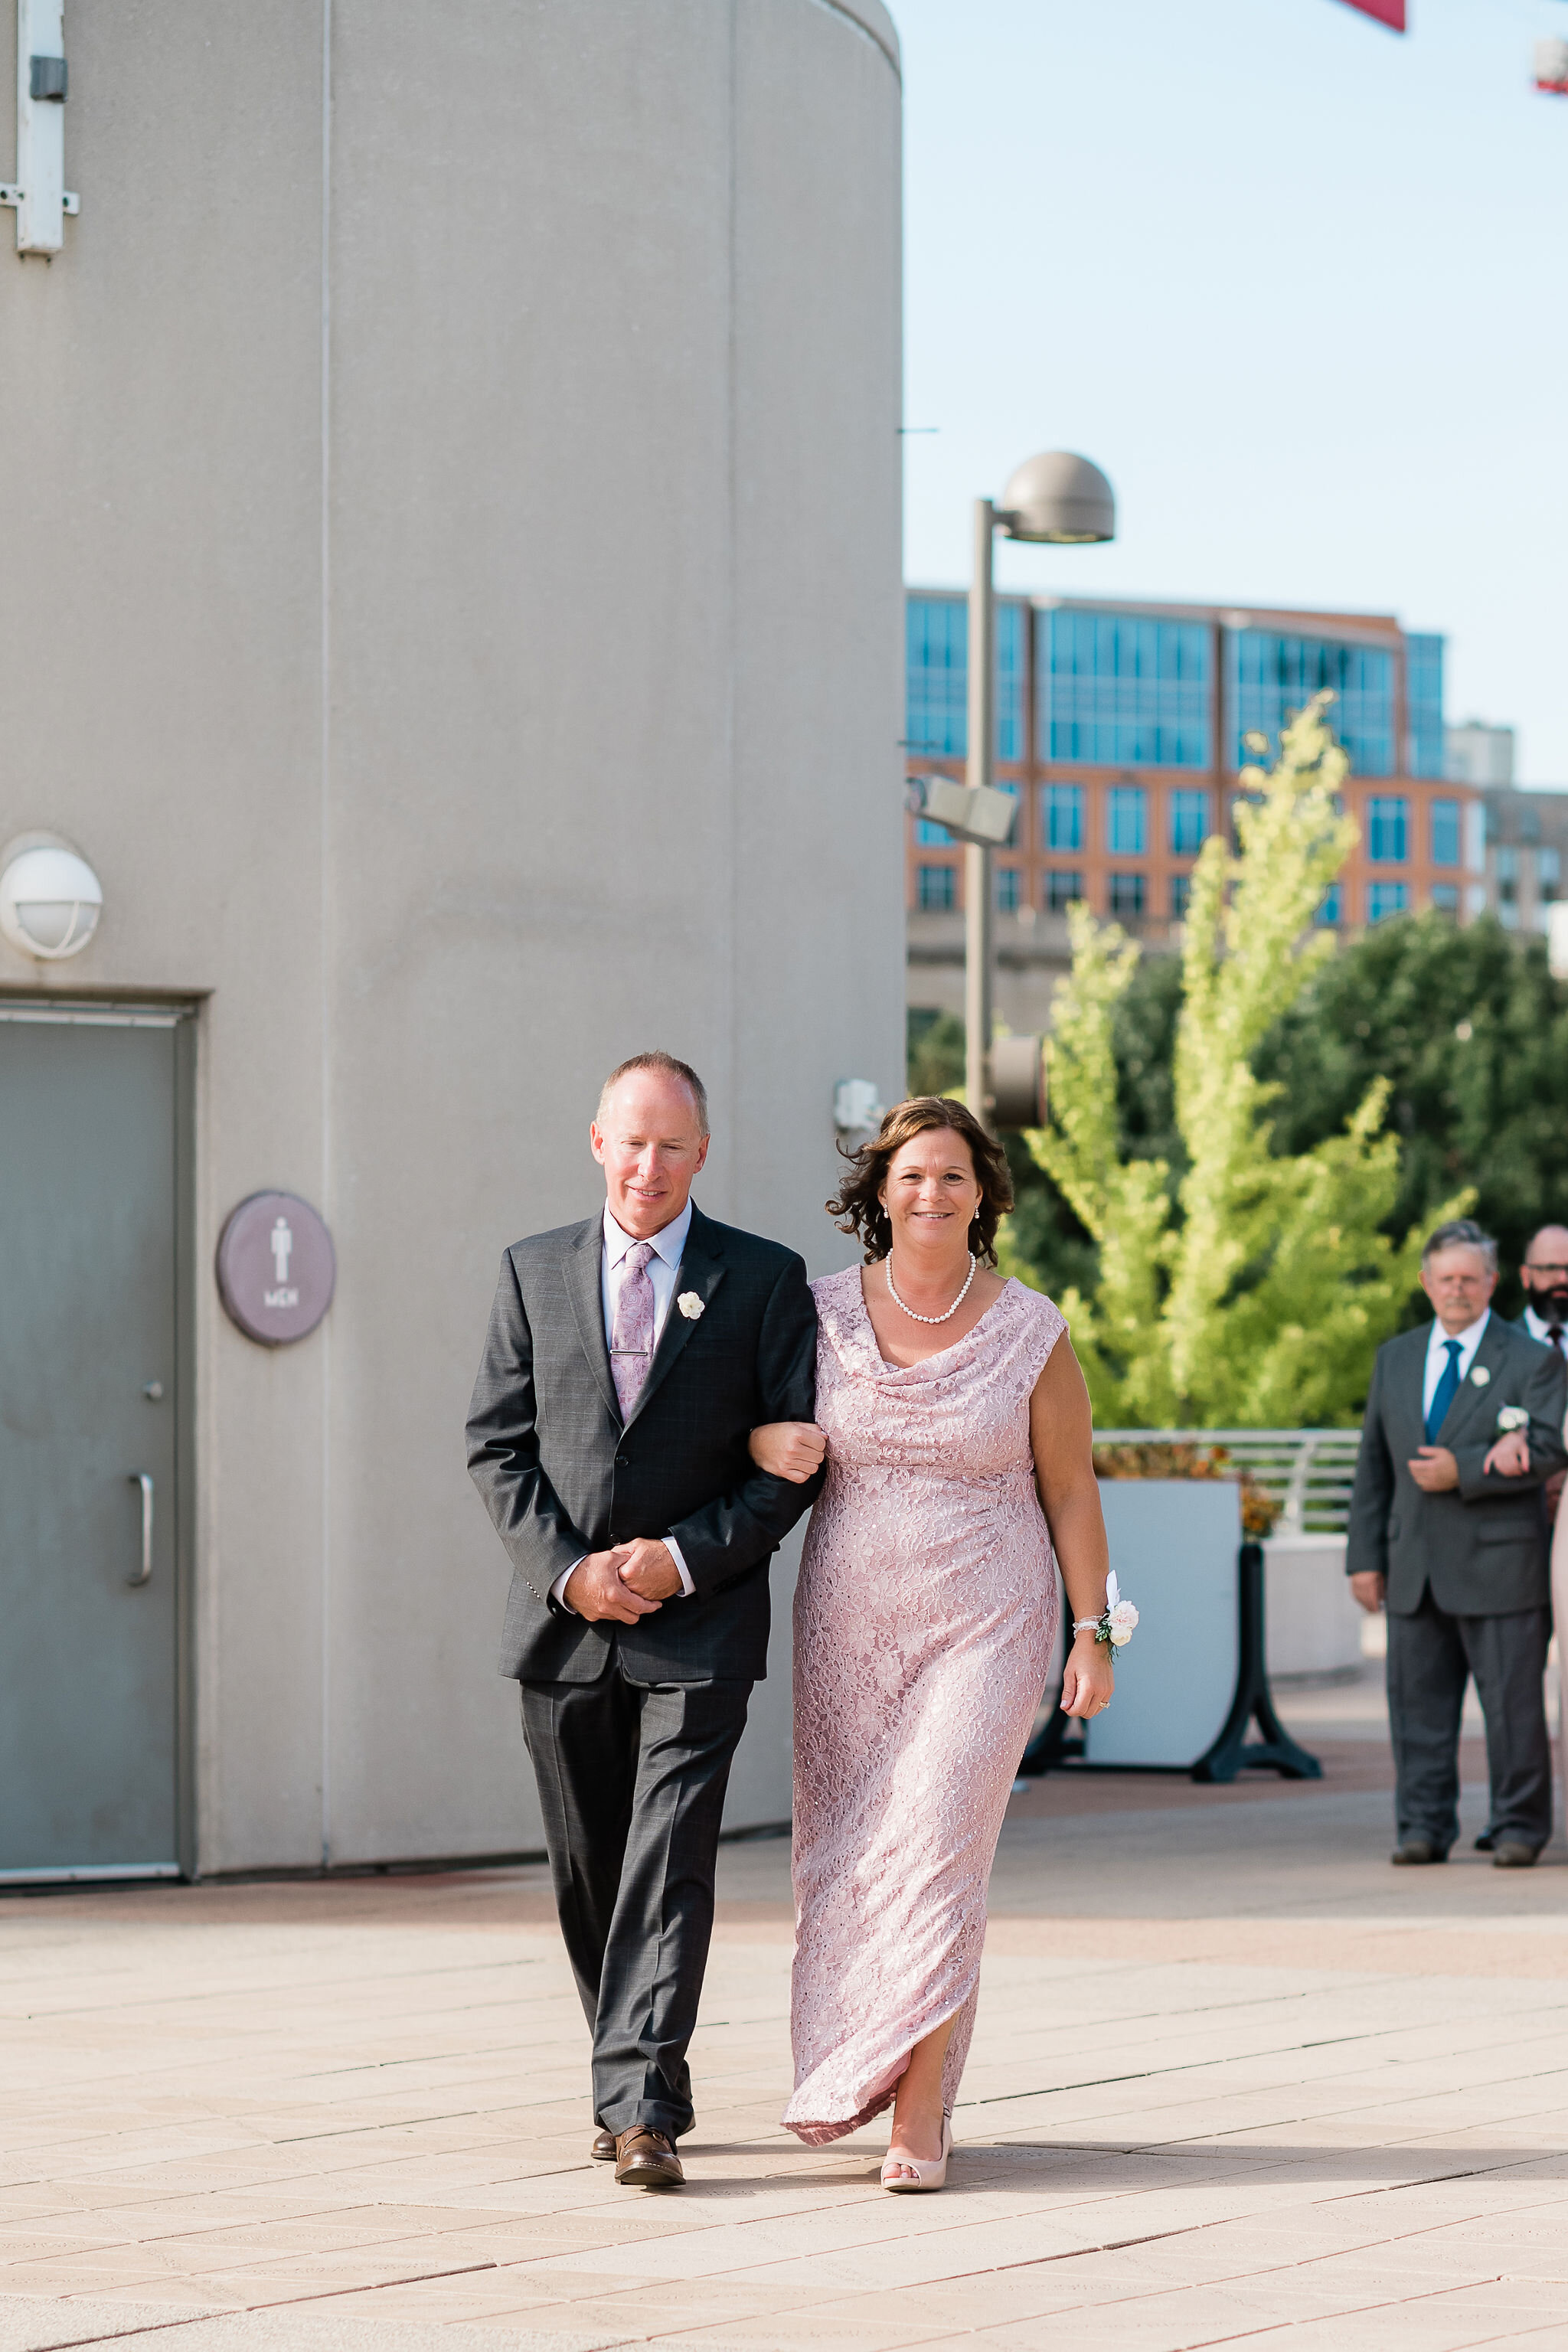 Groom's parents walking down the aisle